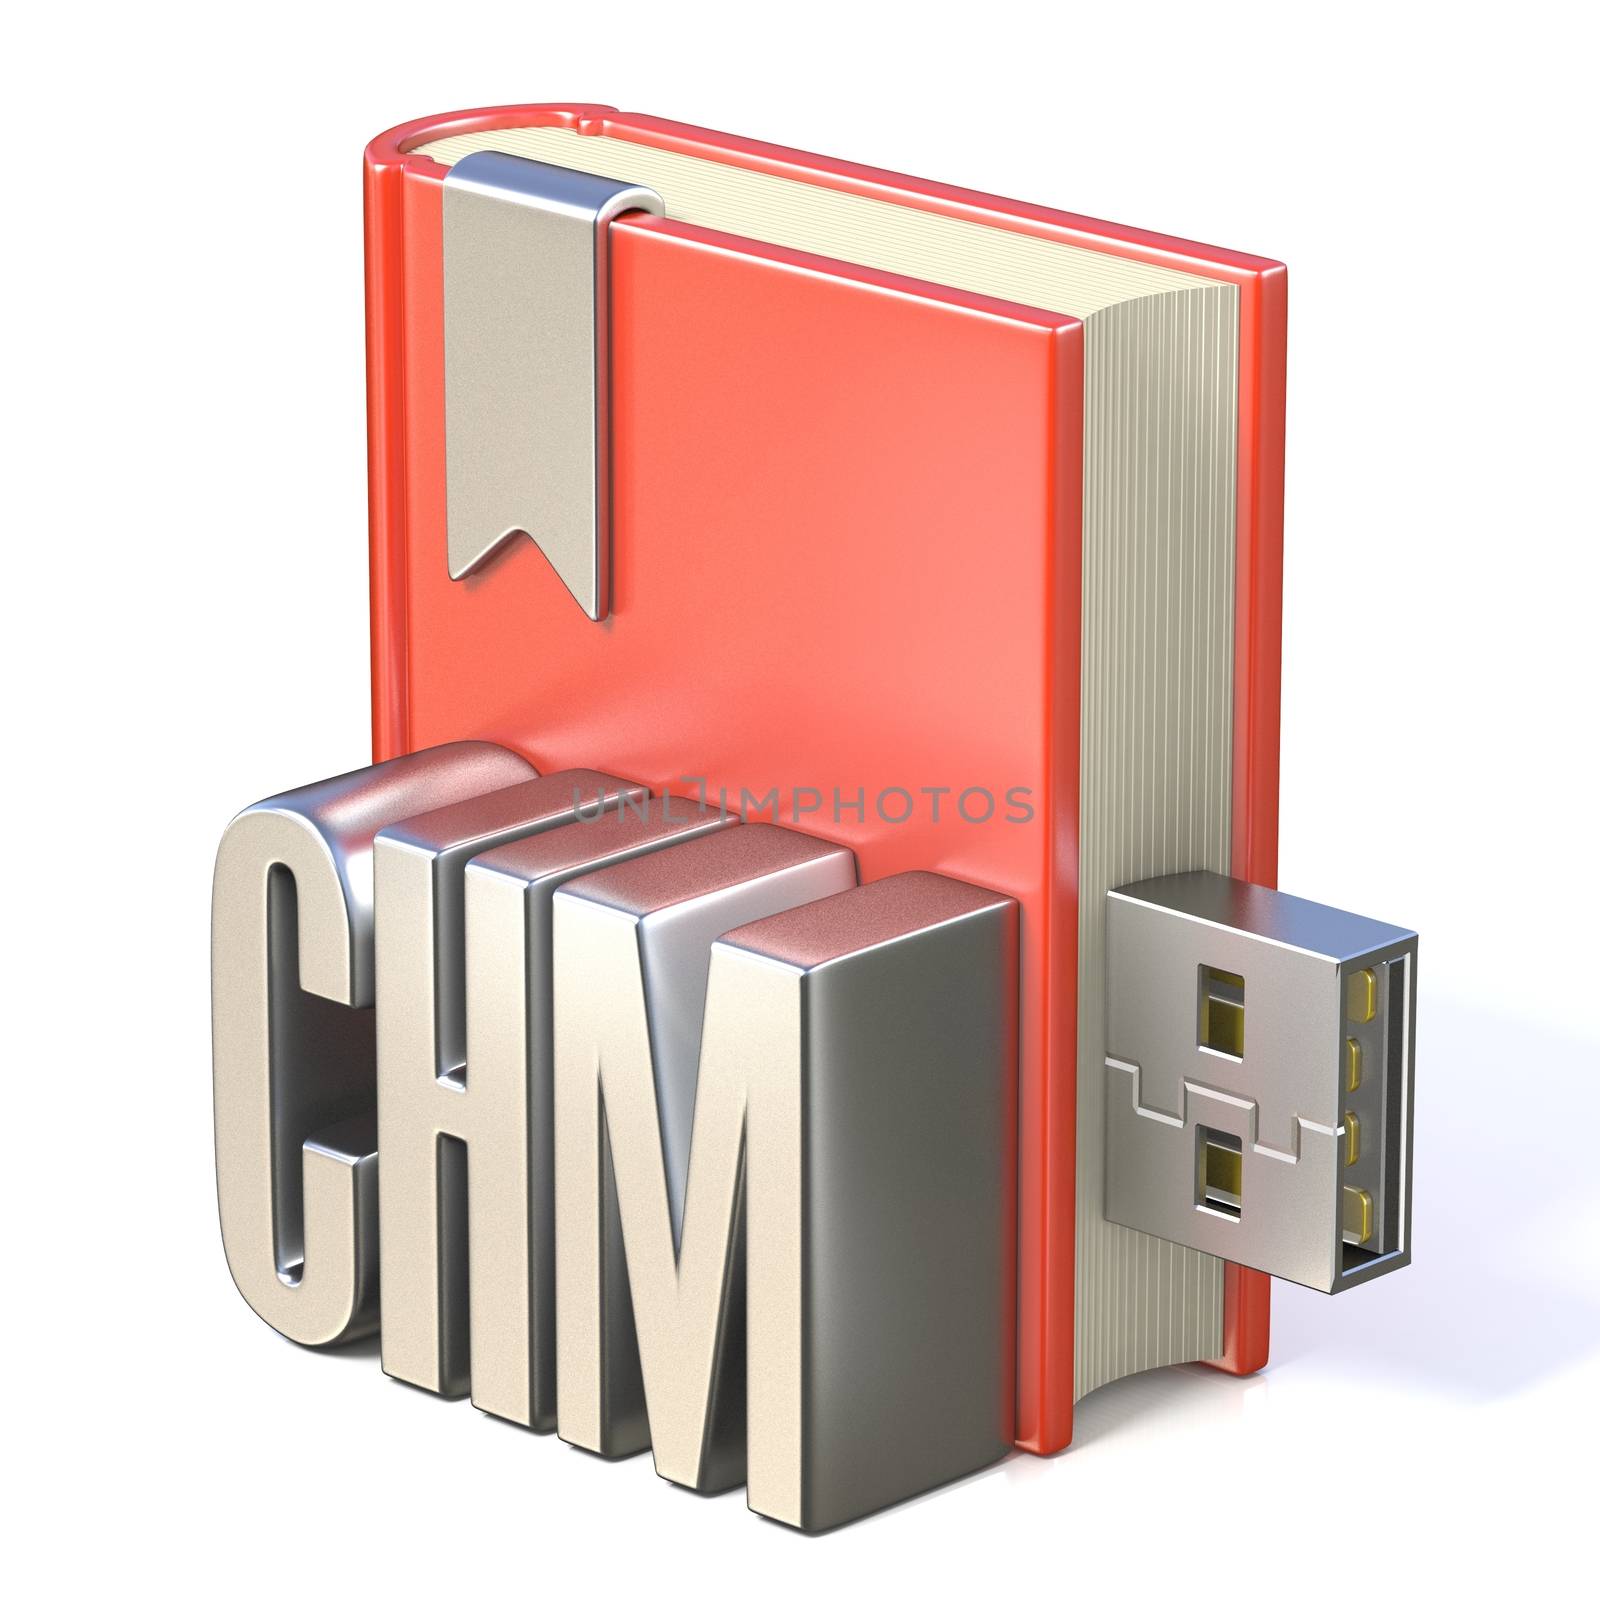 eBook icon metal CHM red book USB 3D render illustration isolated on white background